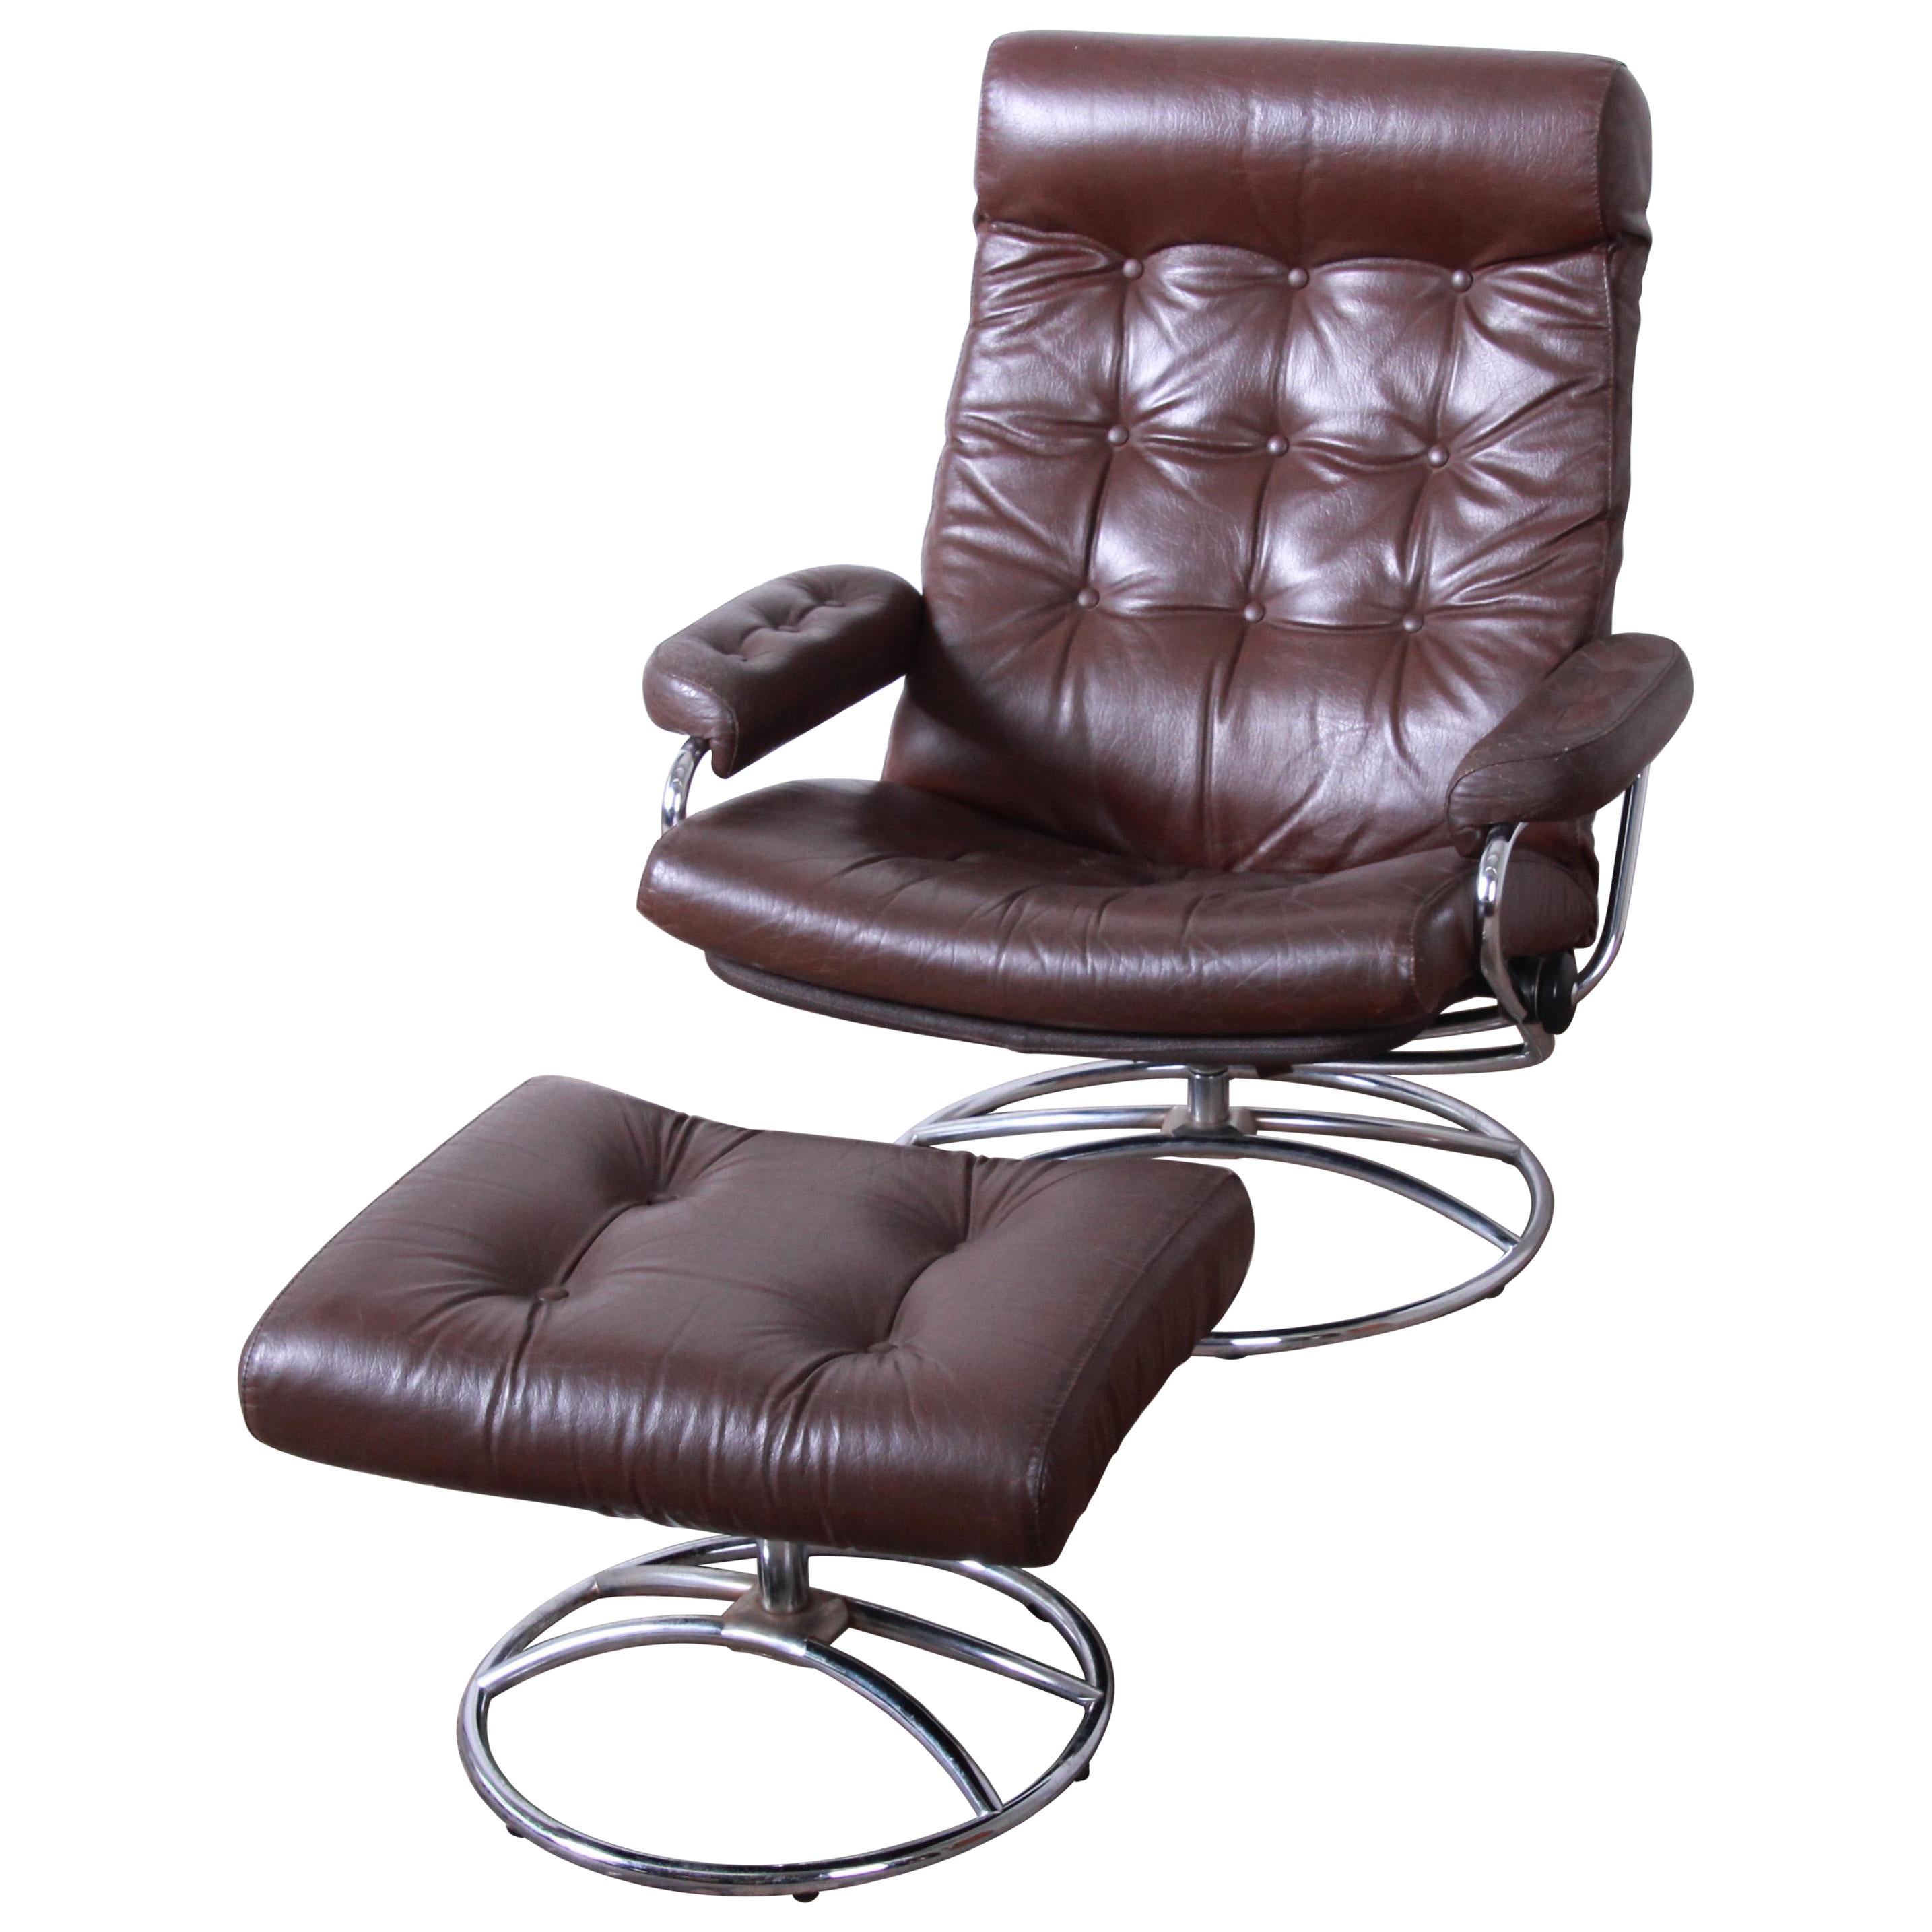 Vintage Ekornes Stressless Chrome and Leather Lounge Chair and Ottoman